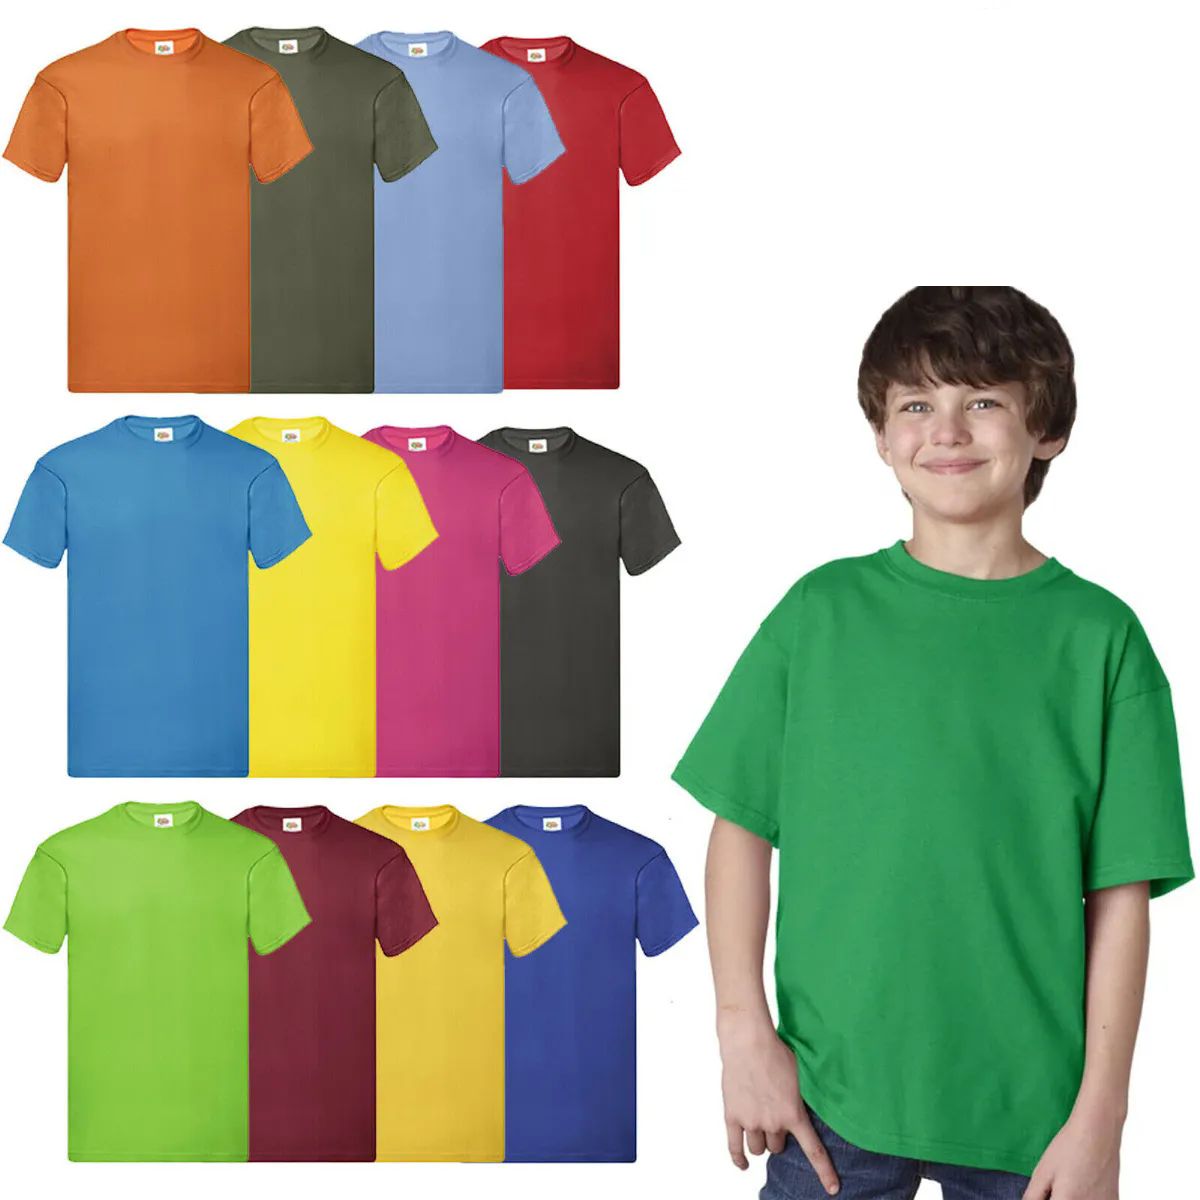 144 Pieces of Billion Hats Kids Youth Cotton Assorted Colors T Shirts Size XL